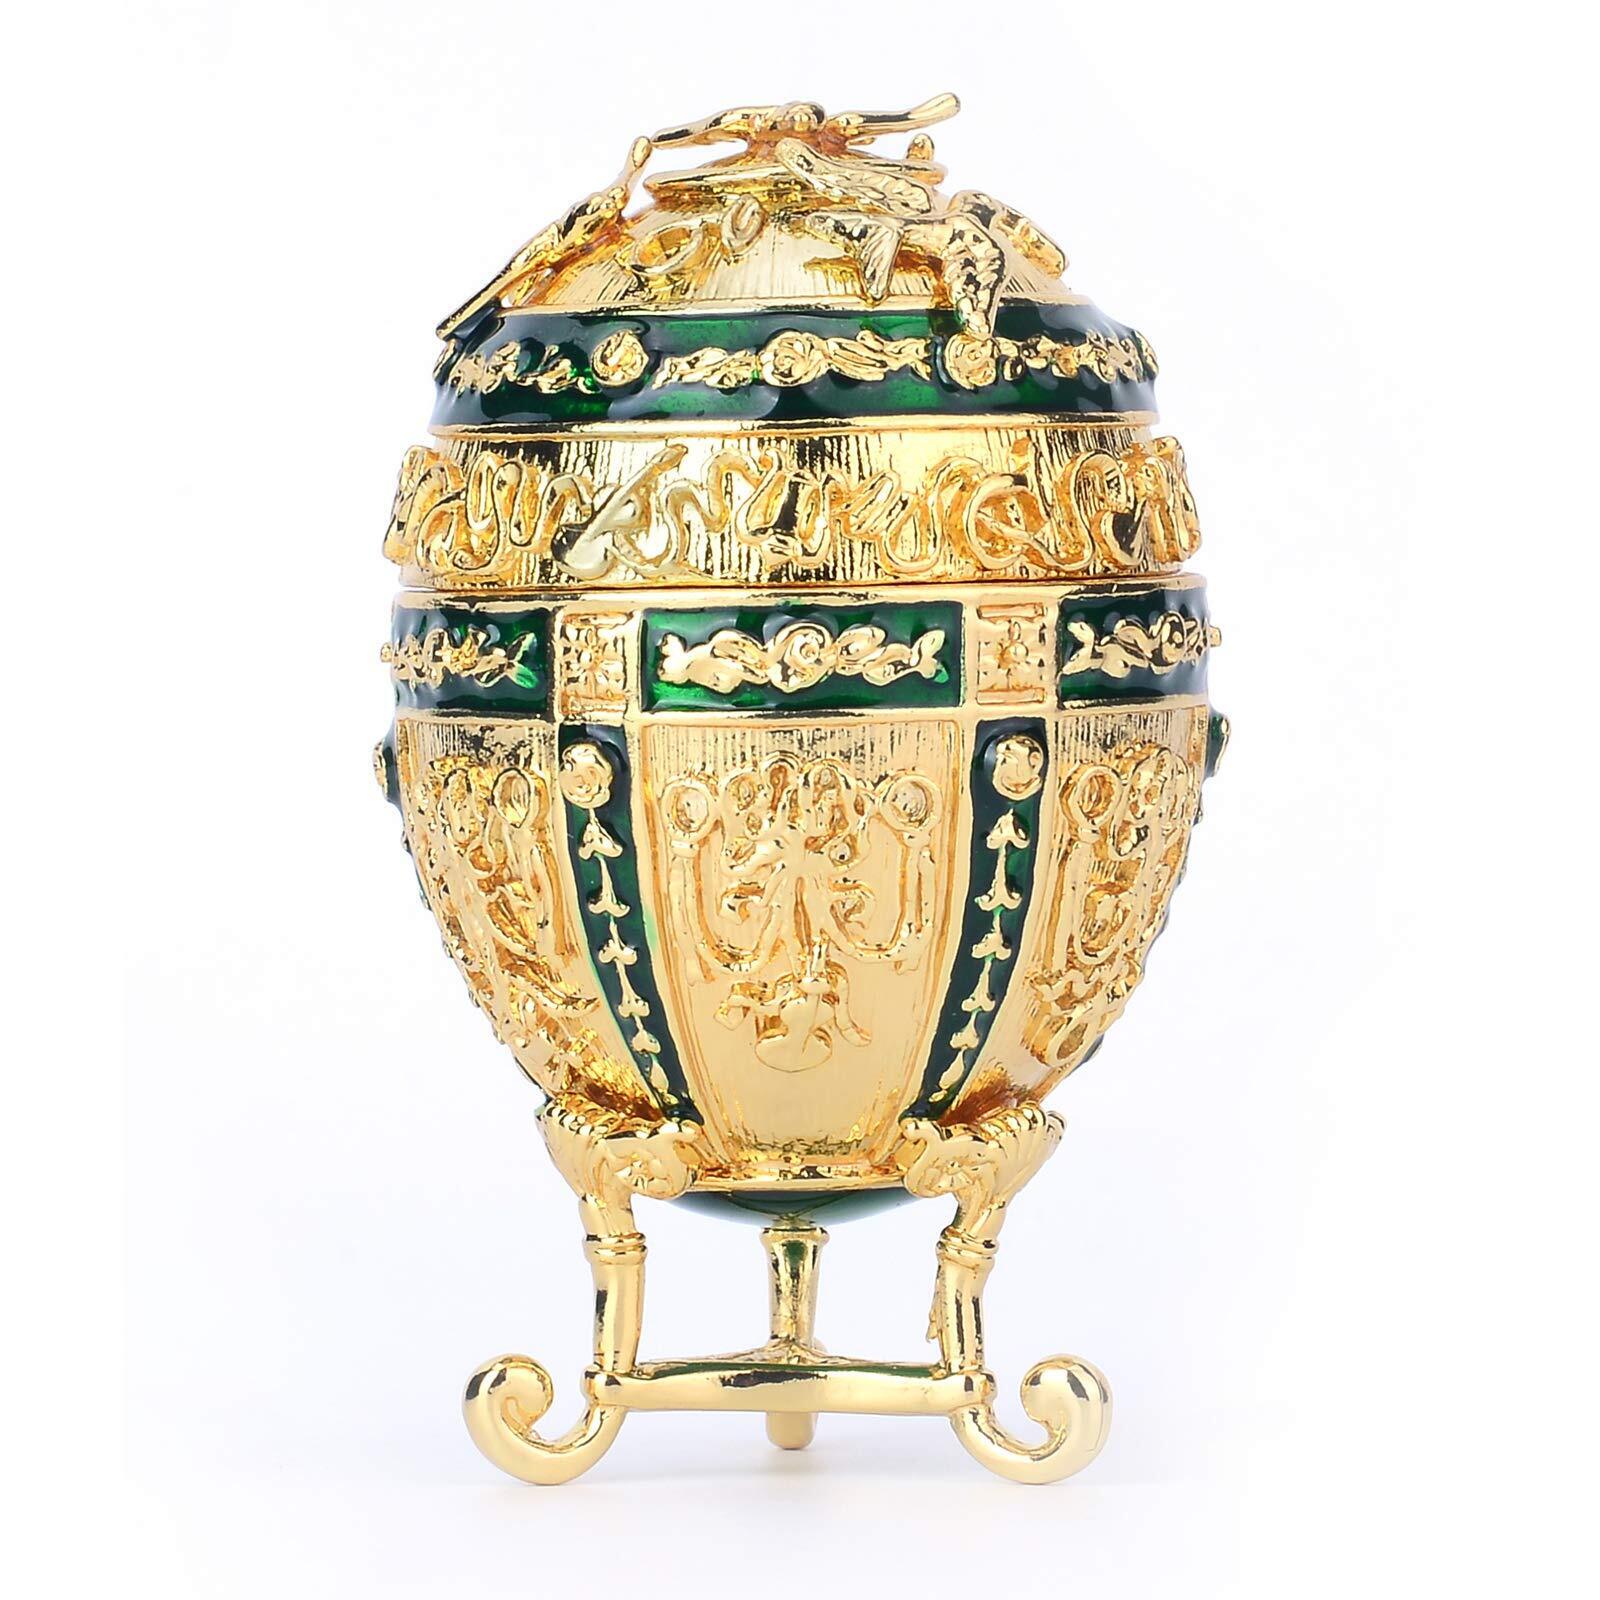 Faberge Egg Jewelry Trinket Box Classic Hand-Painted Ornaments Metal Vintage ...